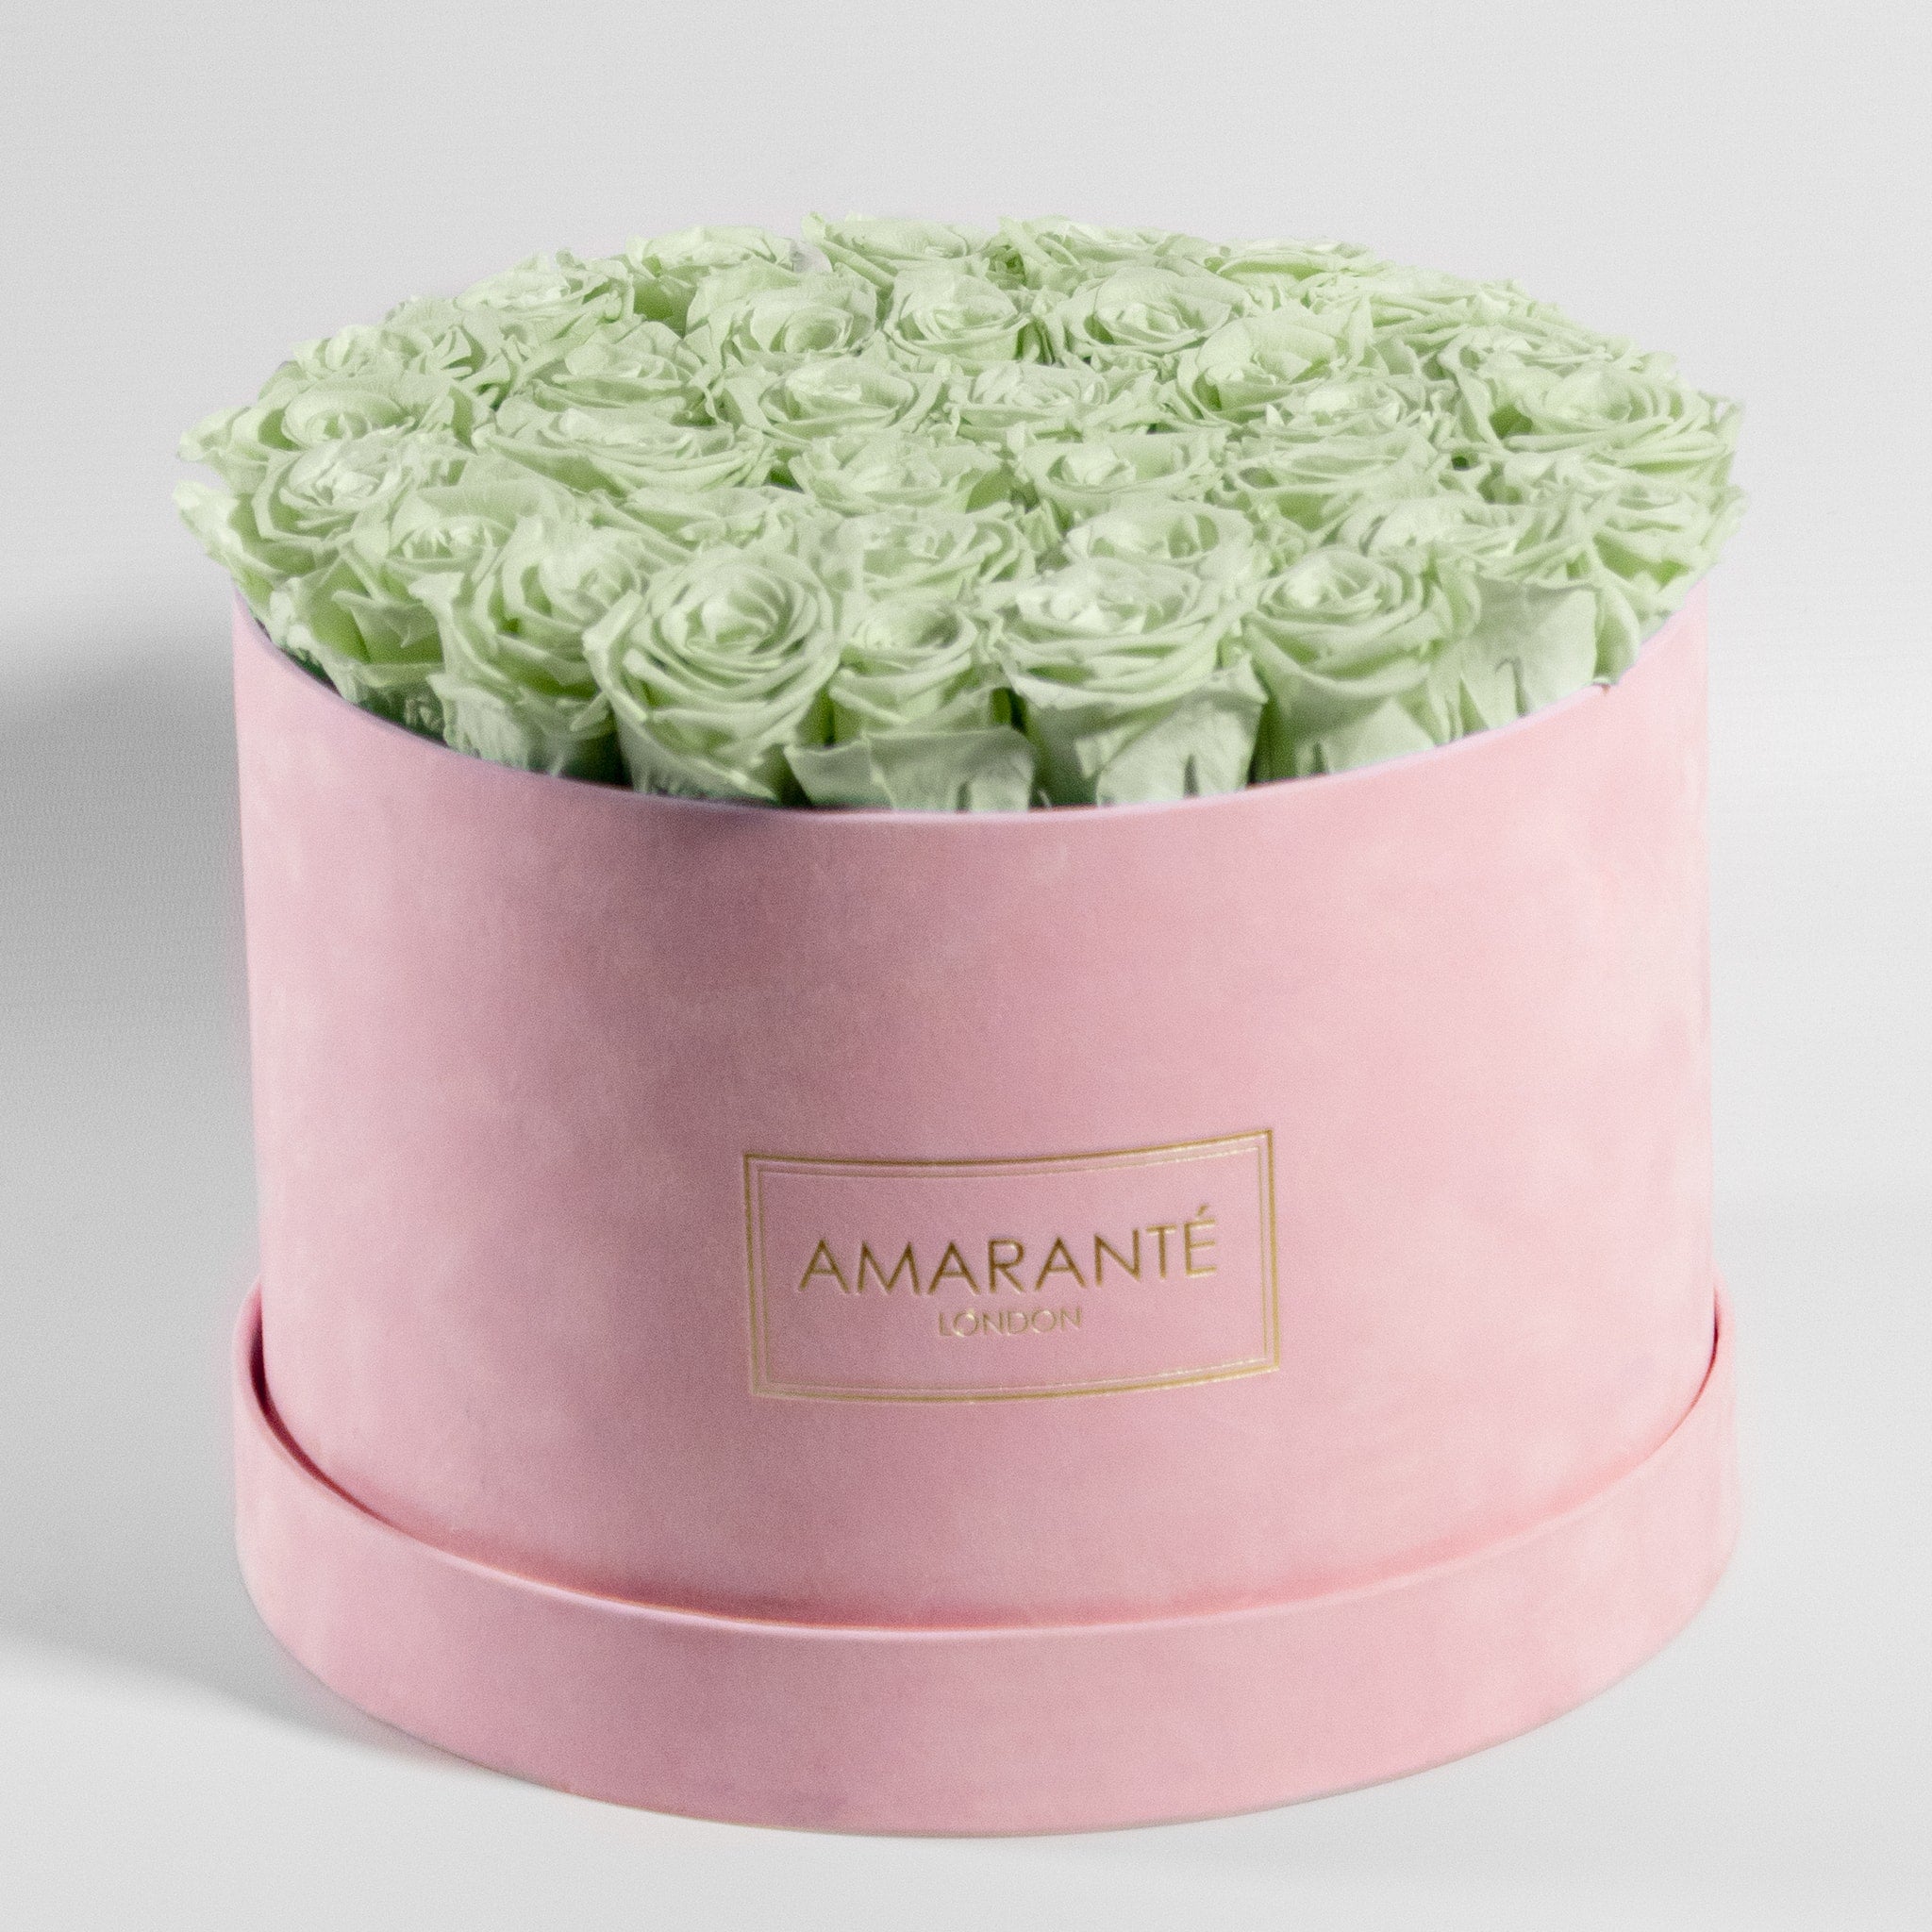 Revitalising mint green Roses, displayed in an idyllic pink box 